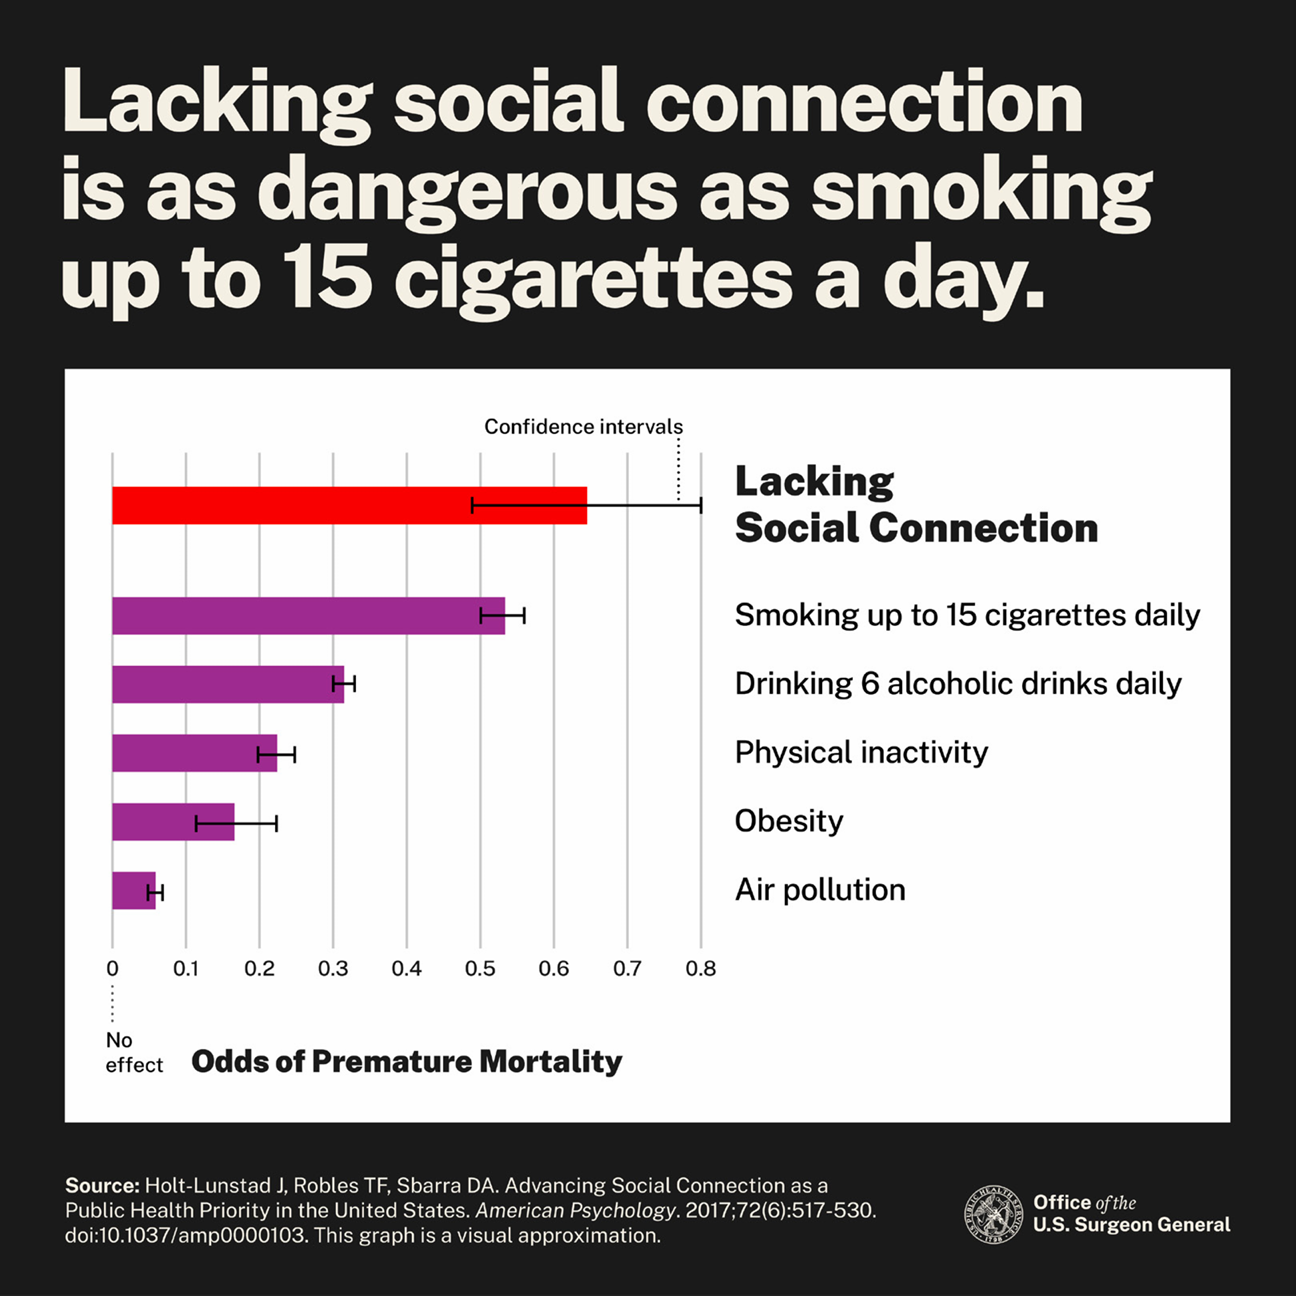 Lack of social connection compared with other health risks. Recent estimates, based on synthesizing data across 148 studies, with an  average of 7.5 years of follow-up, suggest that social connection increases the odds of survival by 50%. Indeed, the effects of social connection, isolation, and loneliness on mortality are comparable, and in some cases greater, than those of  many other risk factors (see Figure 4) including lifestyle factors (e.g., smoking, alcohol consumption, physical inactivity), traditional clinical risks factors (e.g.,  high blood pressure, body mass index, cholesterol levels), environmental factors (e.g., air pollution), and clinical interventions (e.g., flu vaccine, high blood pressure medication, rehabilitation). Graphic: Office of the U.S. Surgeon General